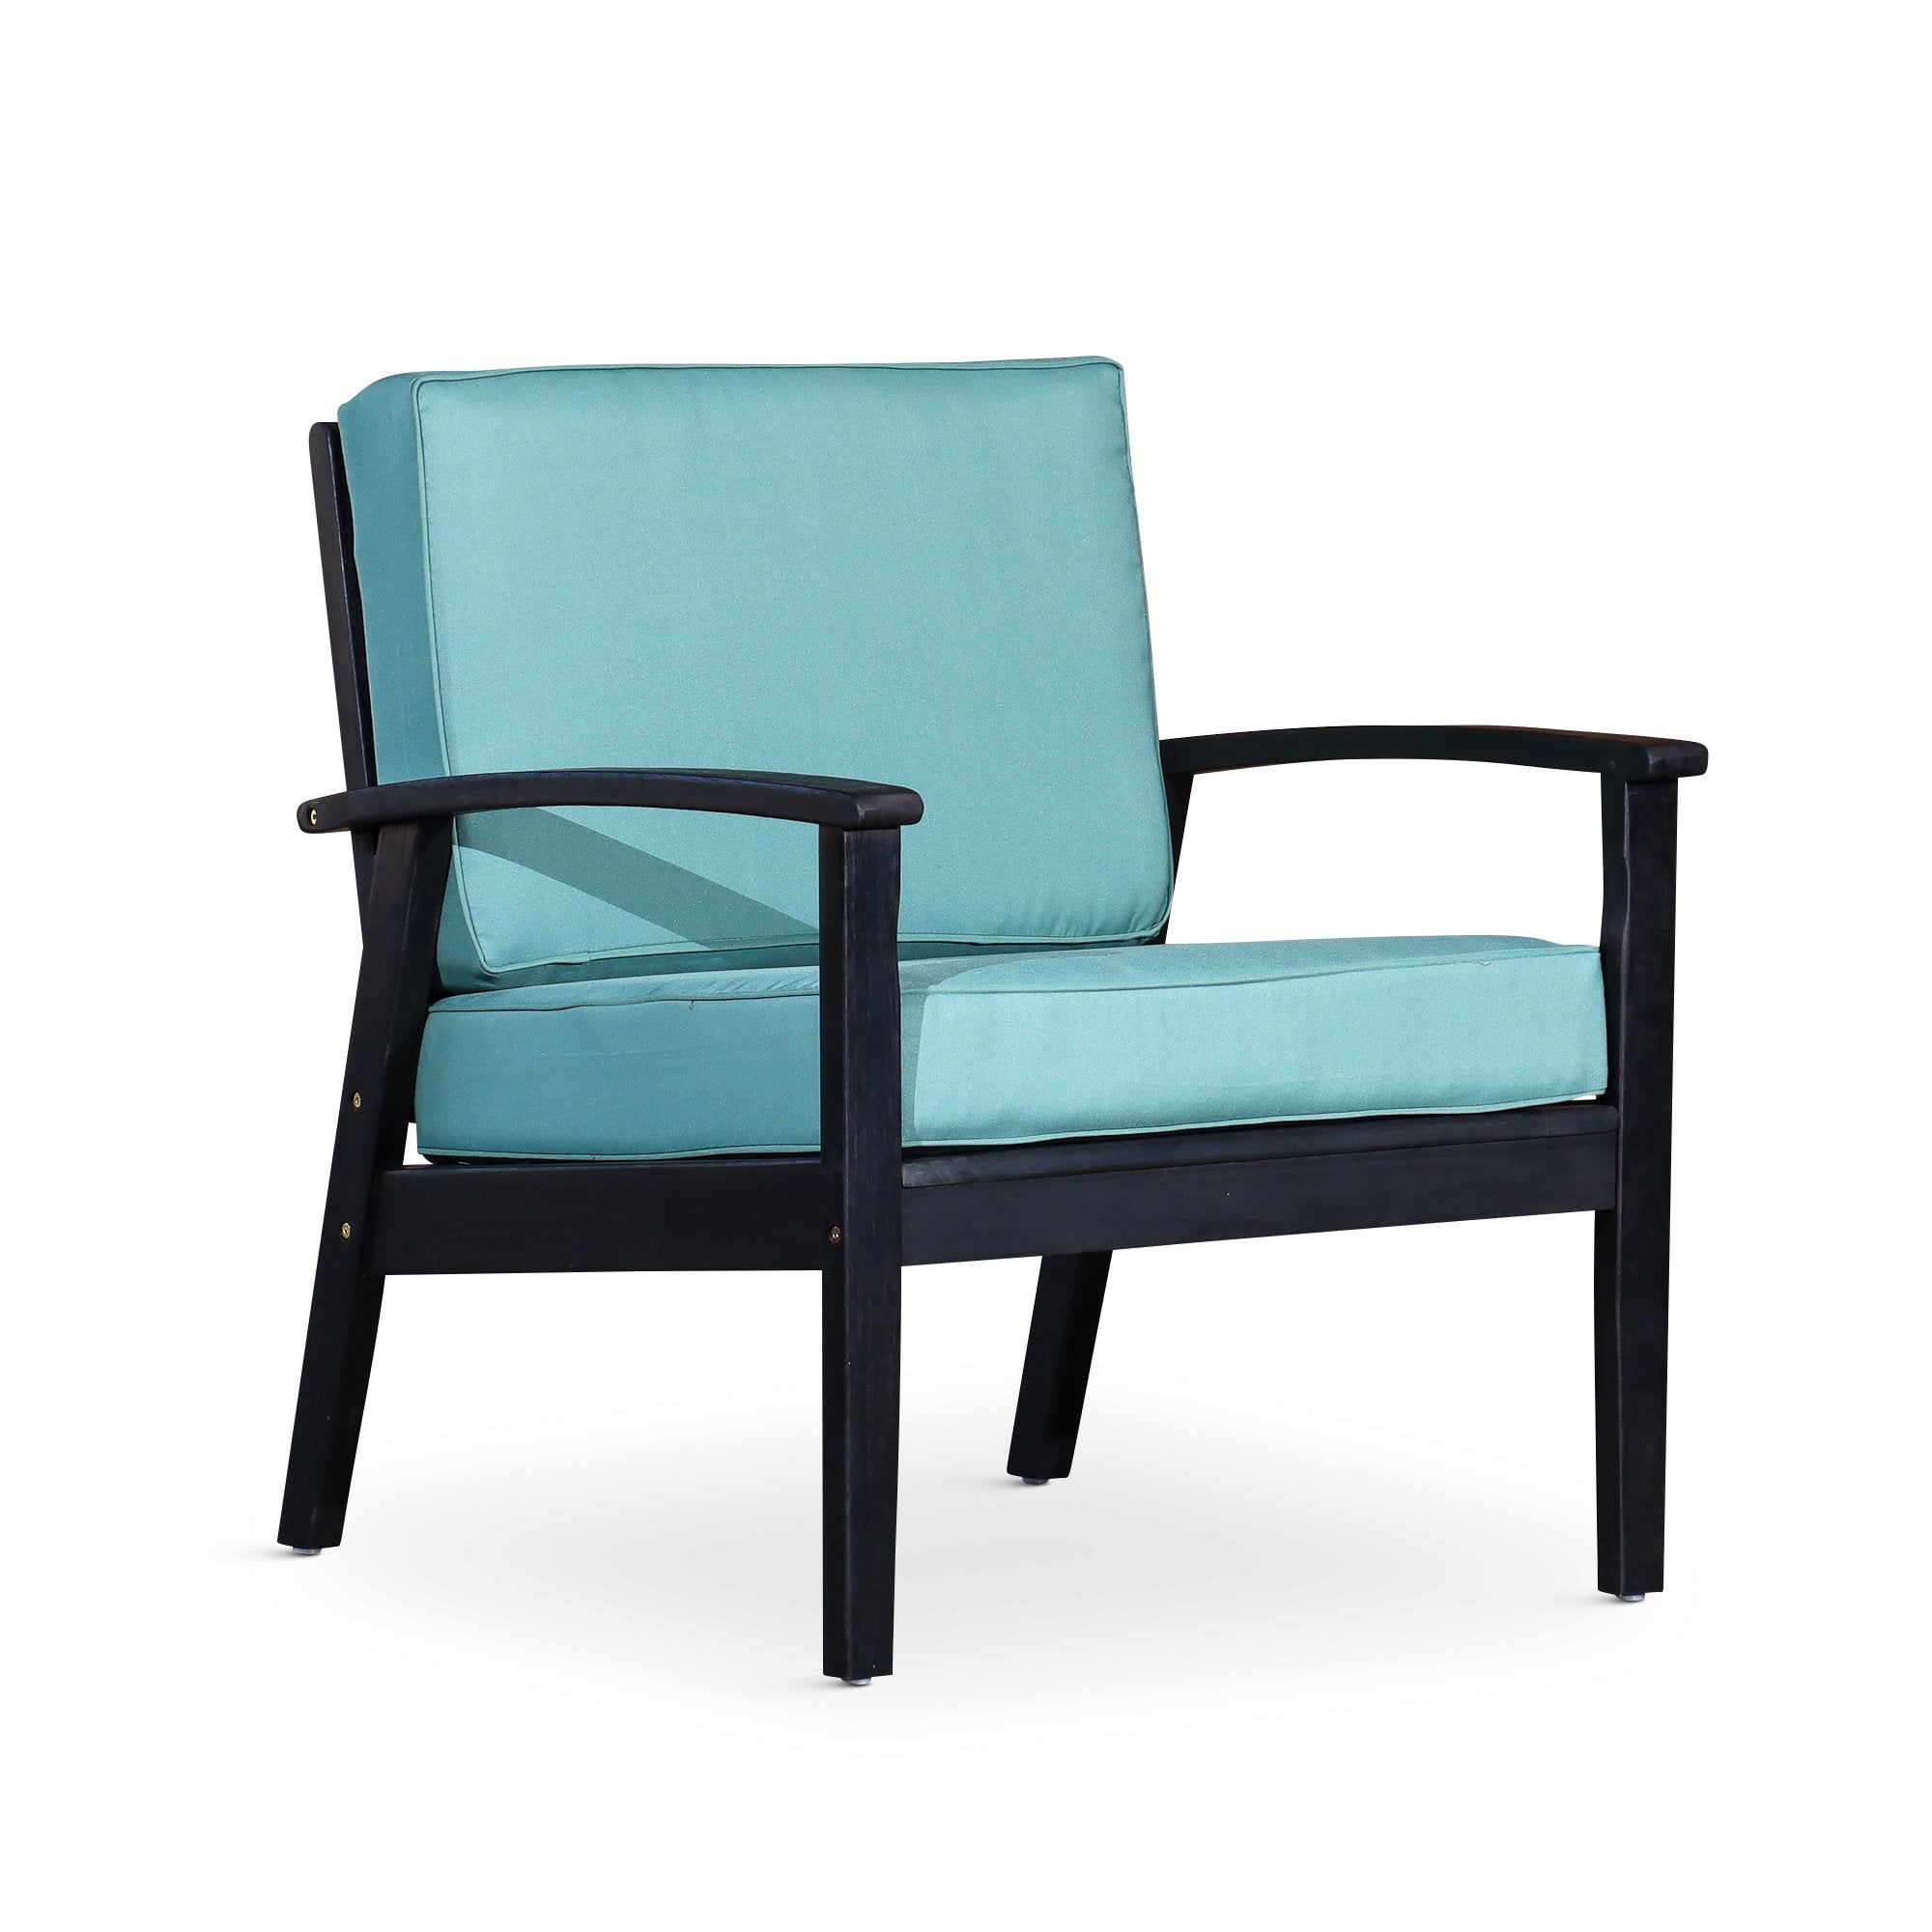 Deep-Seat-Outdoor-Chair,-Espresso-Finish,-Sage-Cushion-Outdoor-Chairs